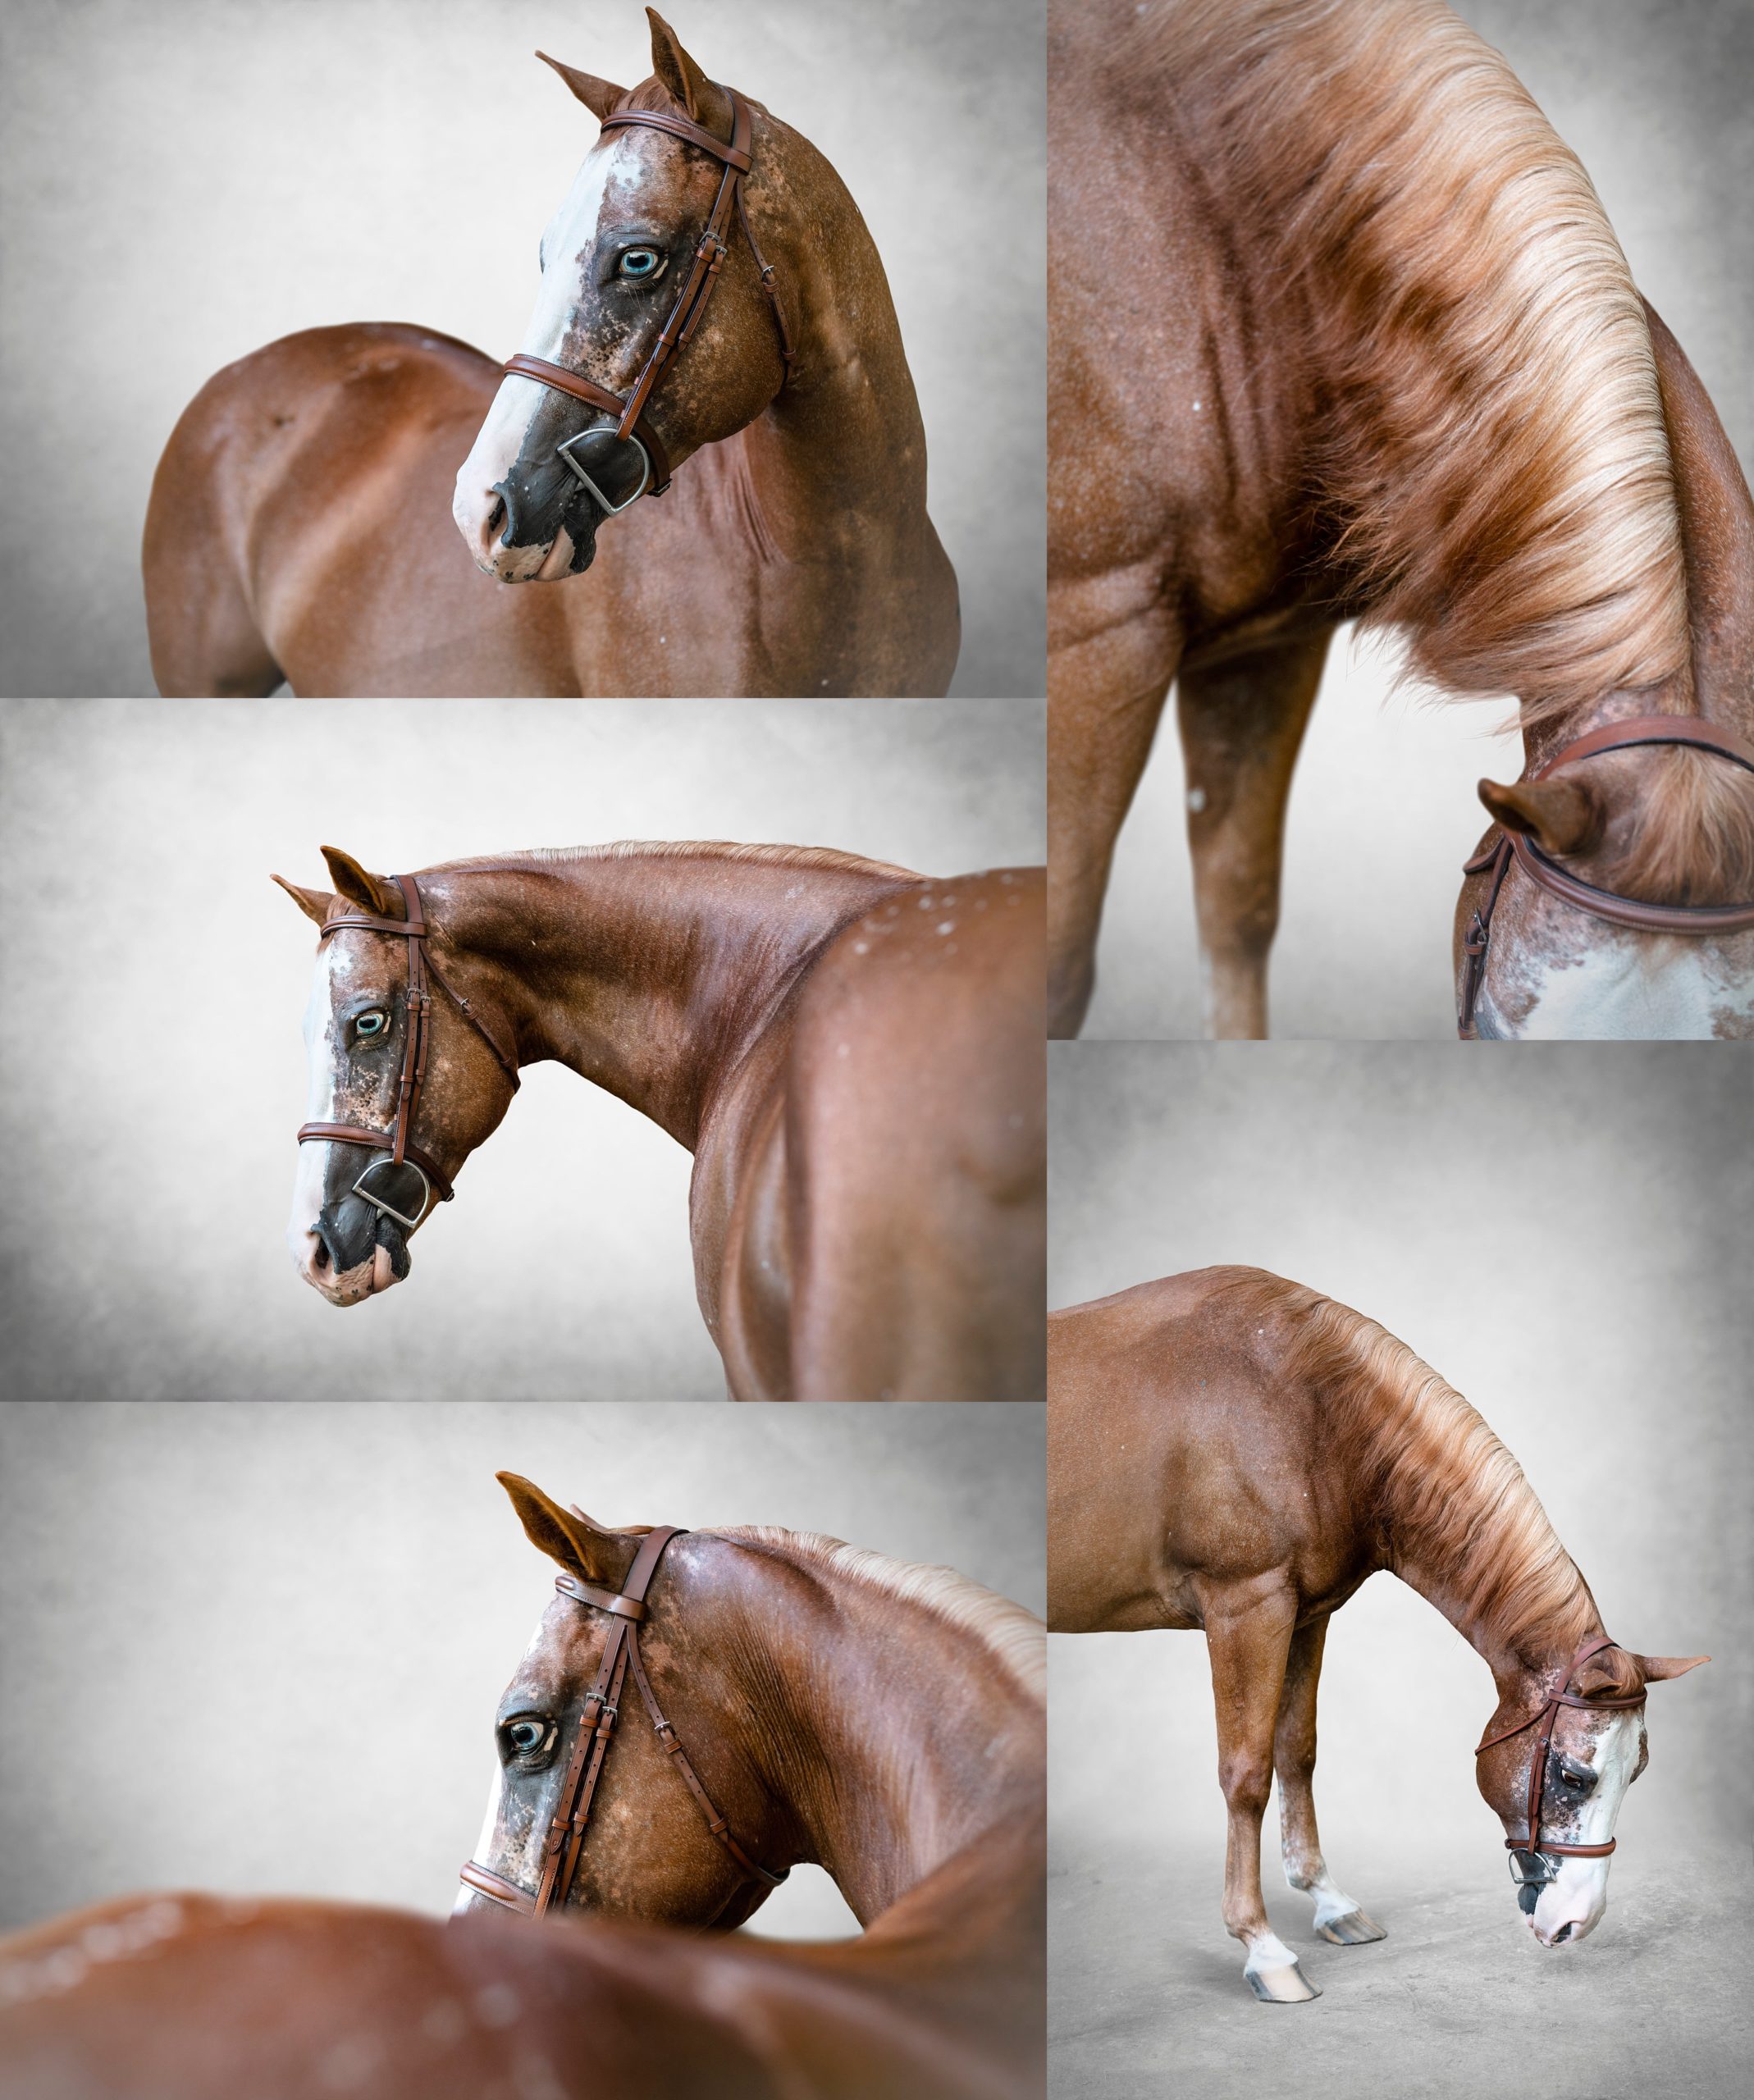 Unique photos of horses for wall art.